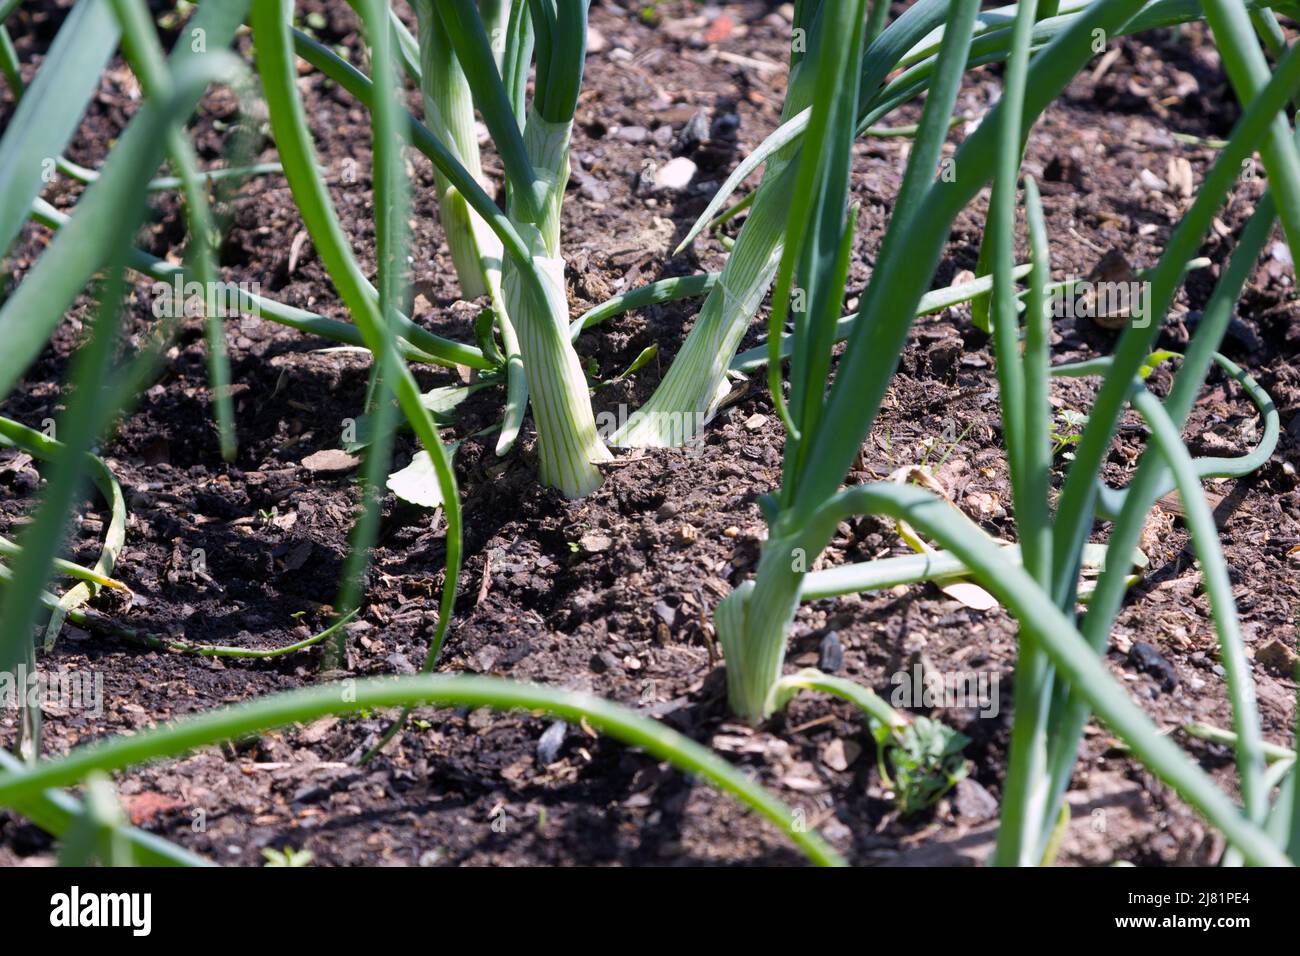 onions growing in a vegetable bed Stock Photo